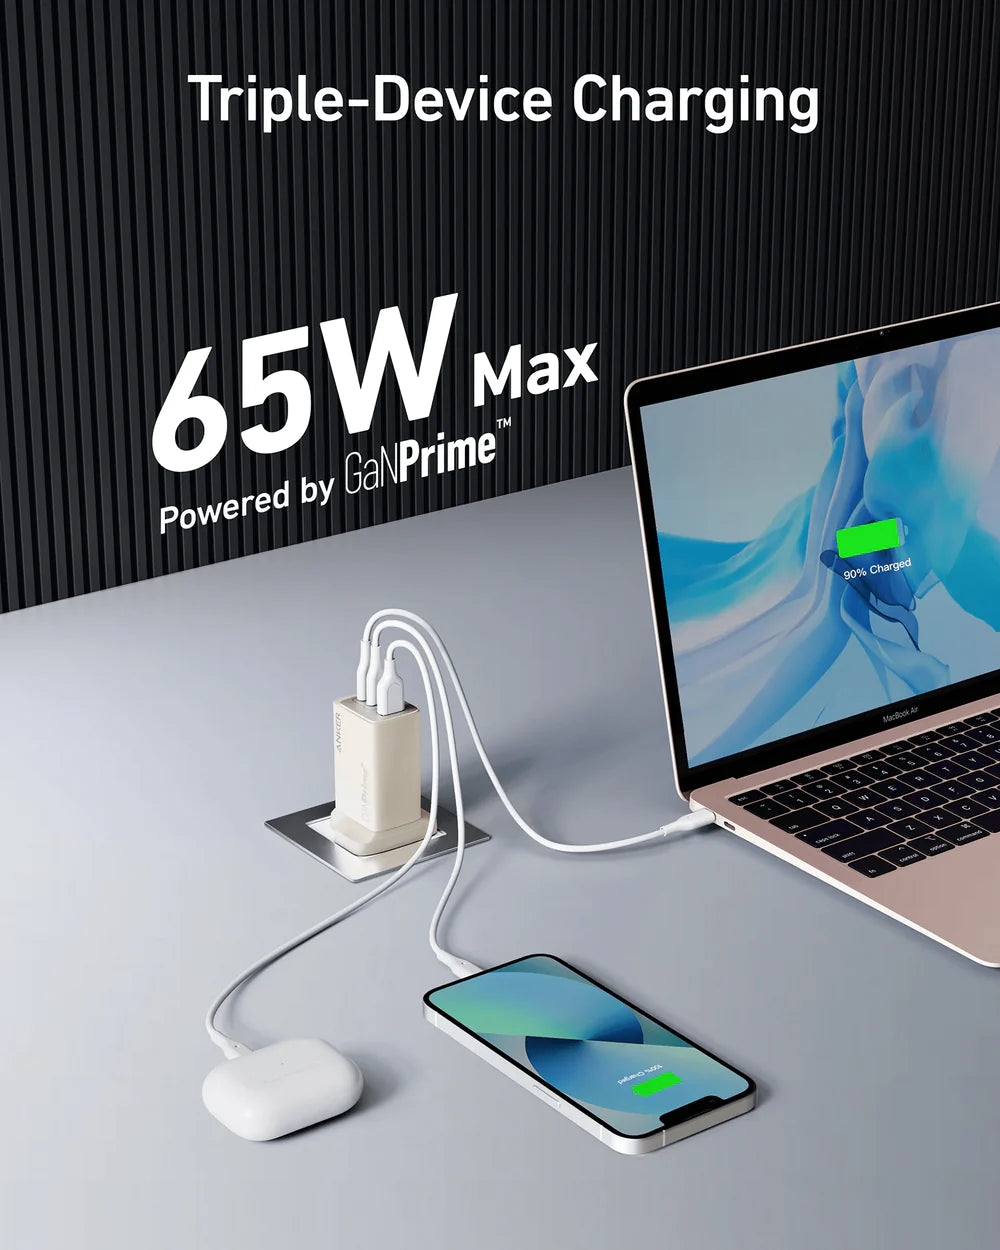 Anker 735 Charger (GaN Prime 65W)